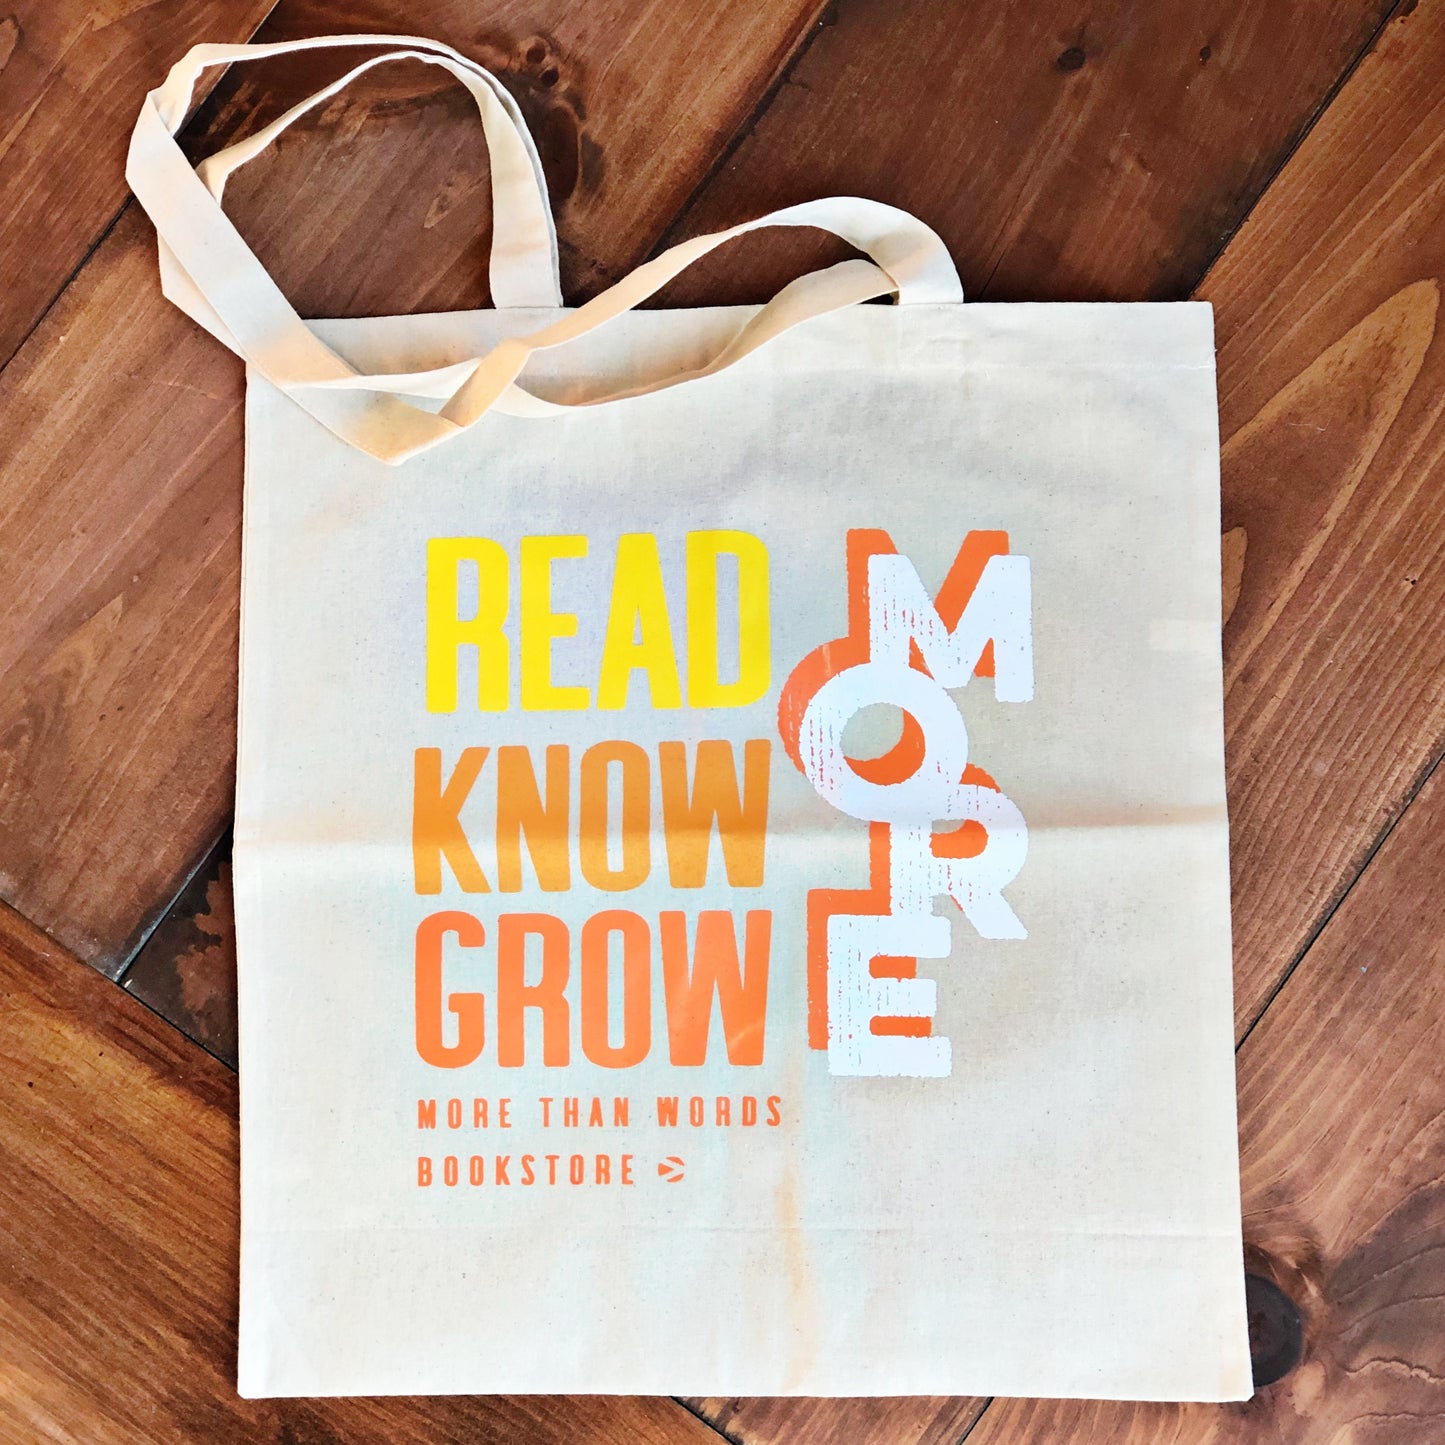 A tote bag displaying the phrase "Read Know Grow" in bold white, yellow, and orange letters against a rustic wooden backdrop